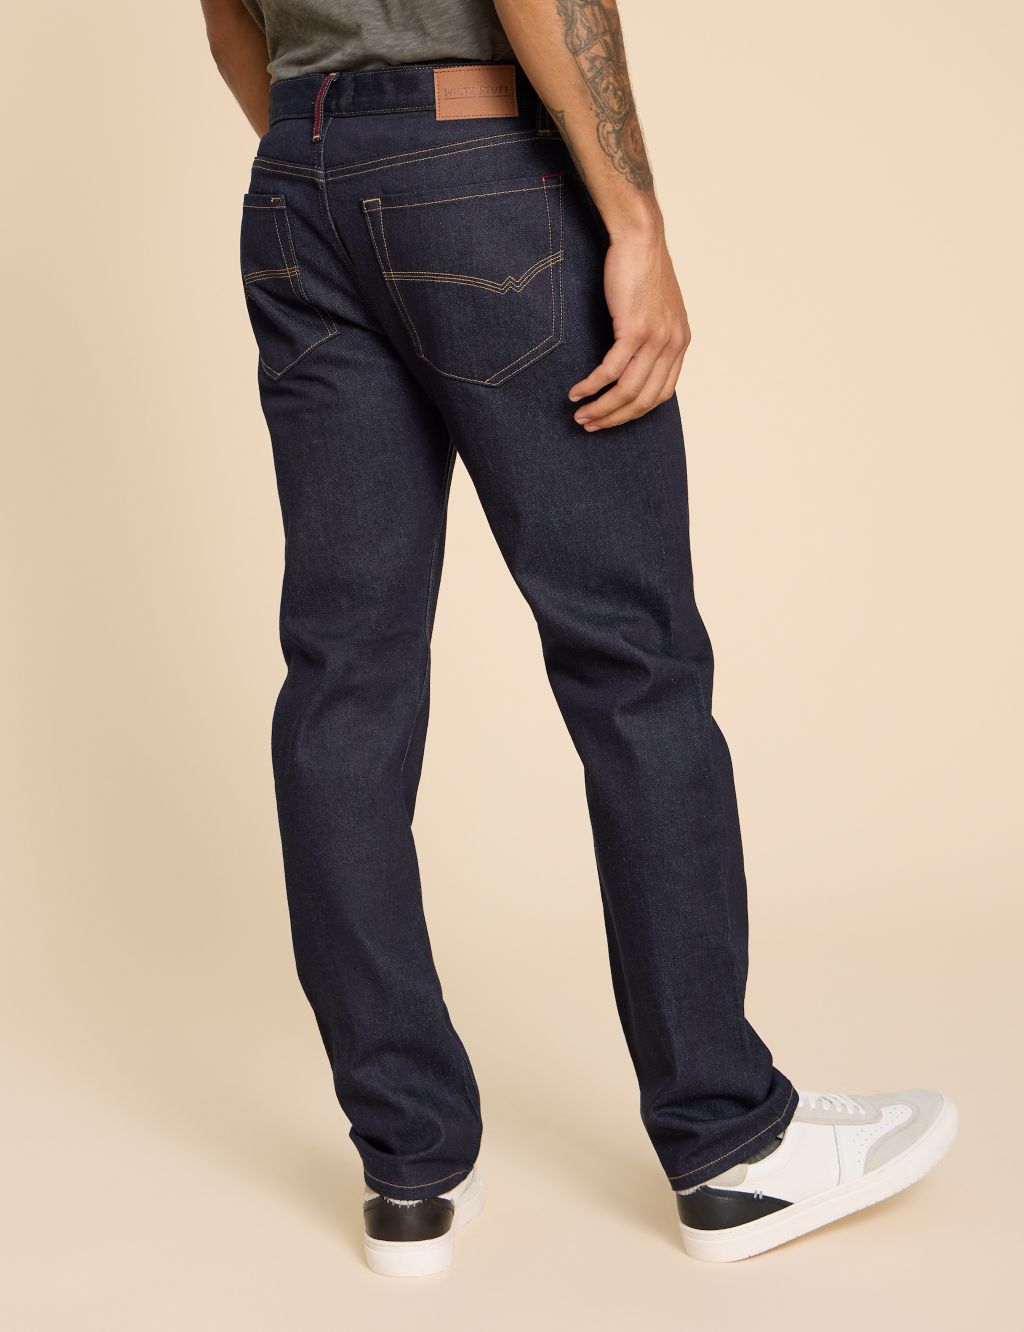 Straight Fit 5 Pocket Jeans image 4